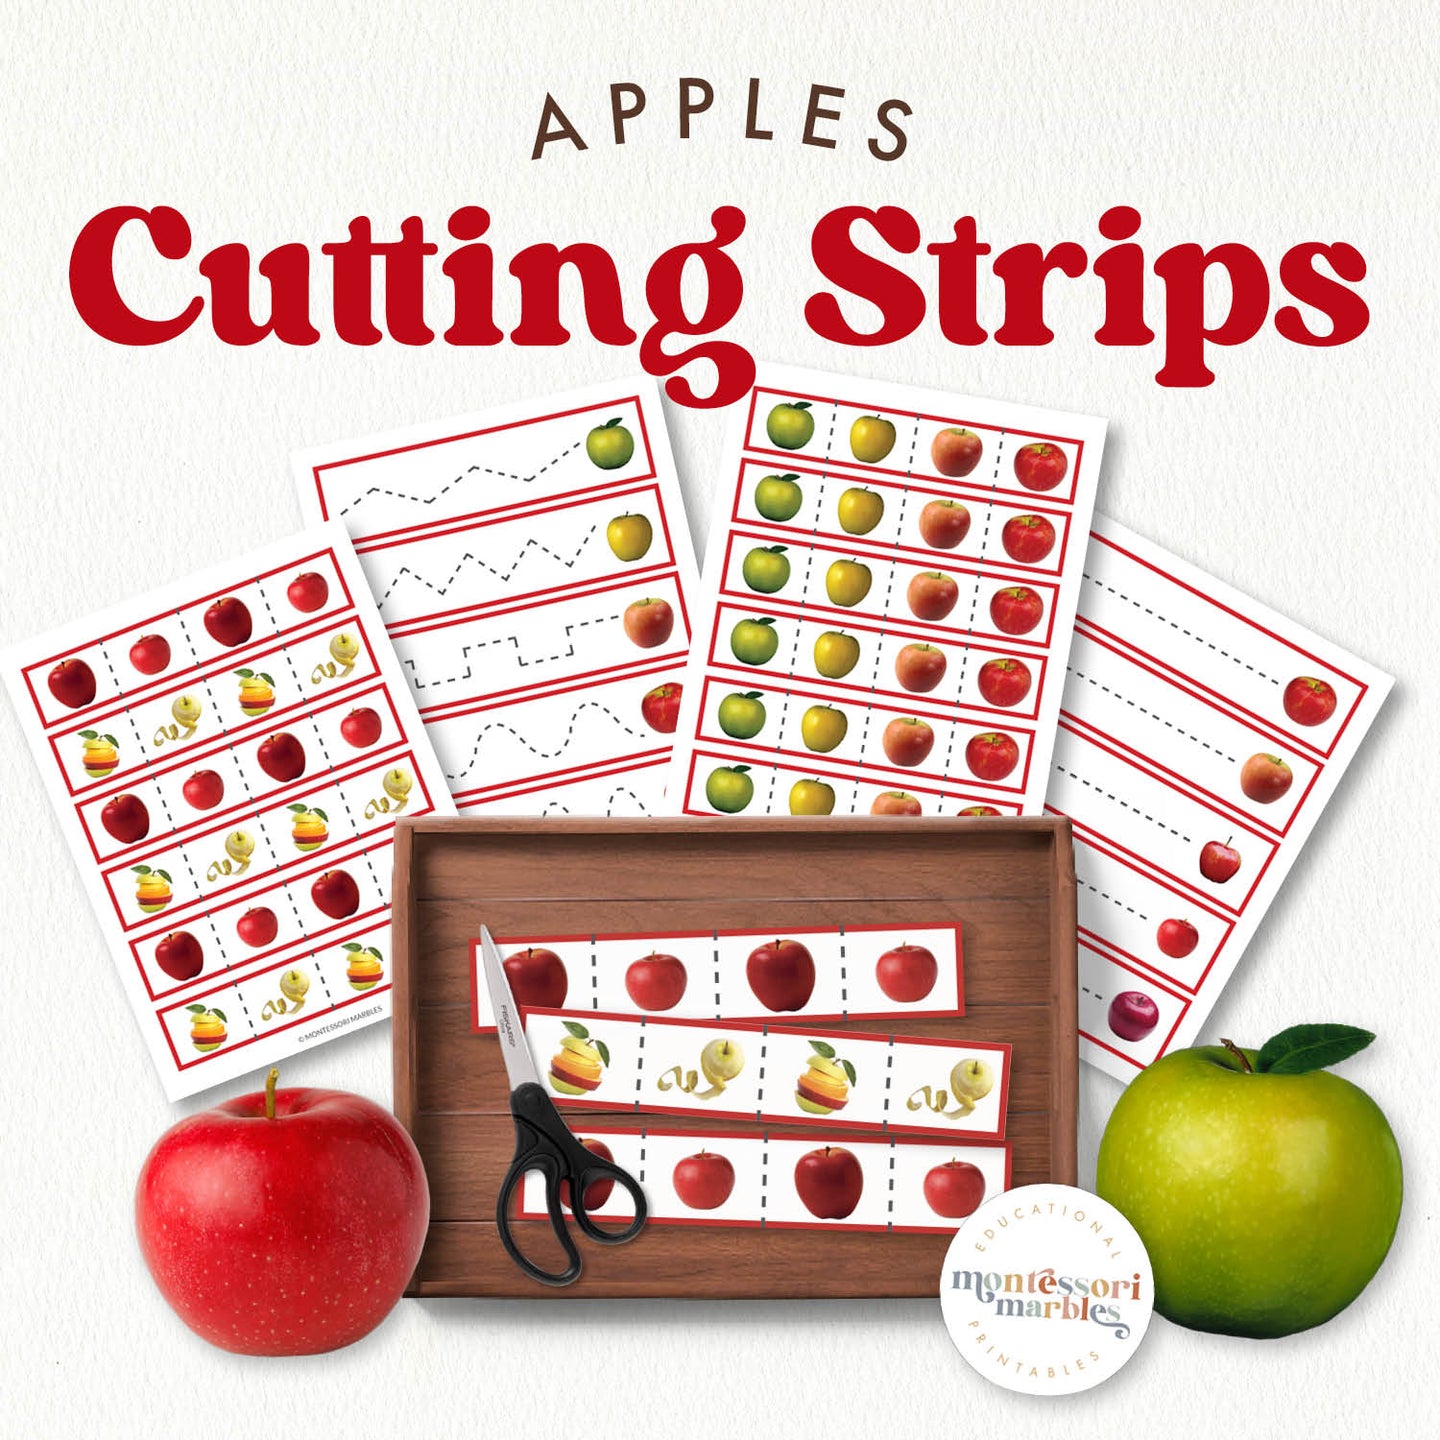 Apples Cutting Strips